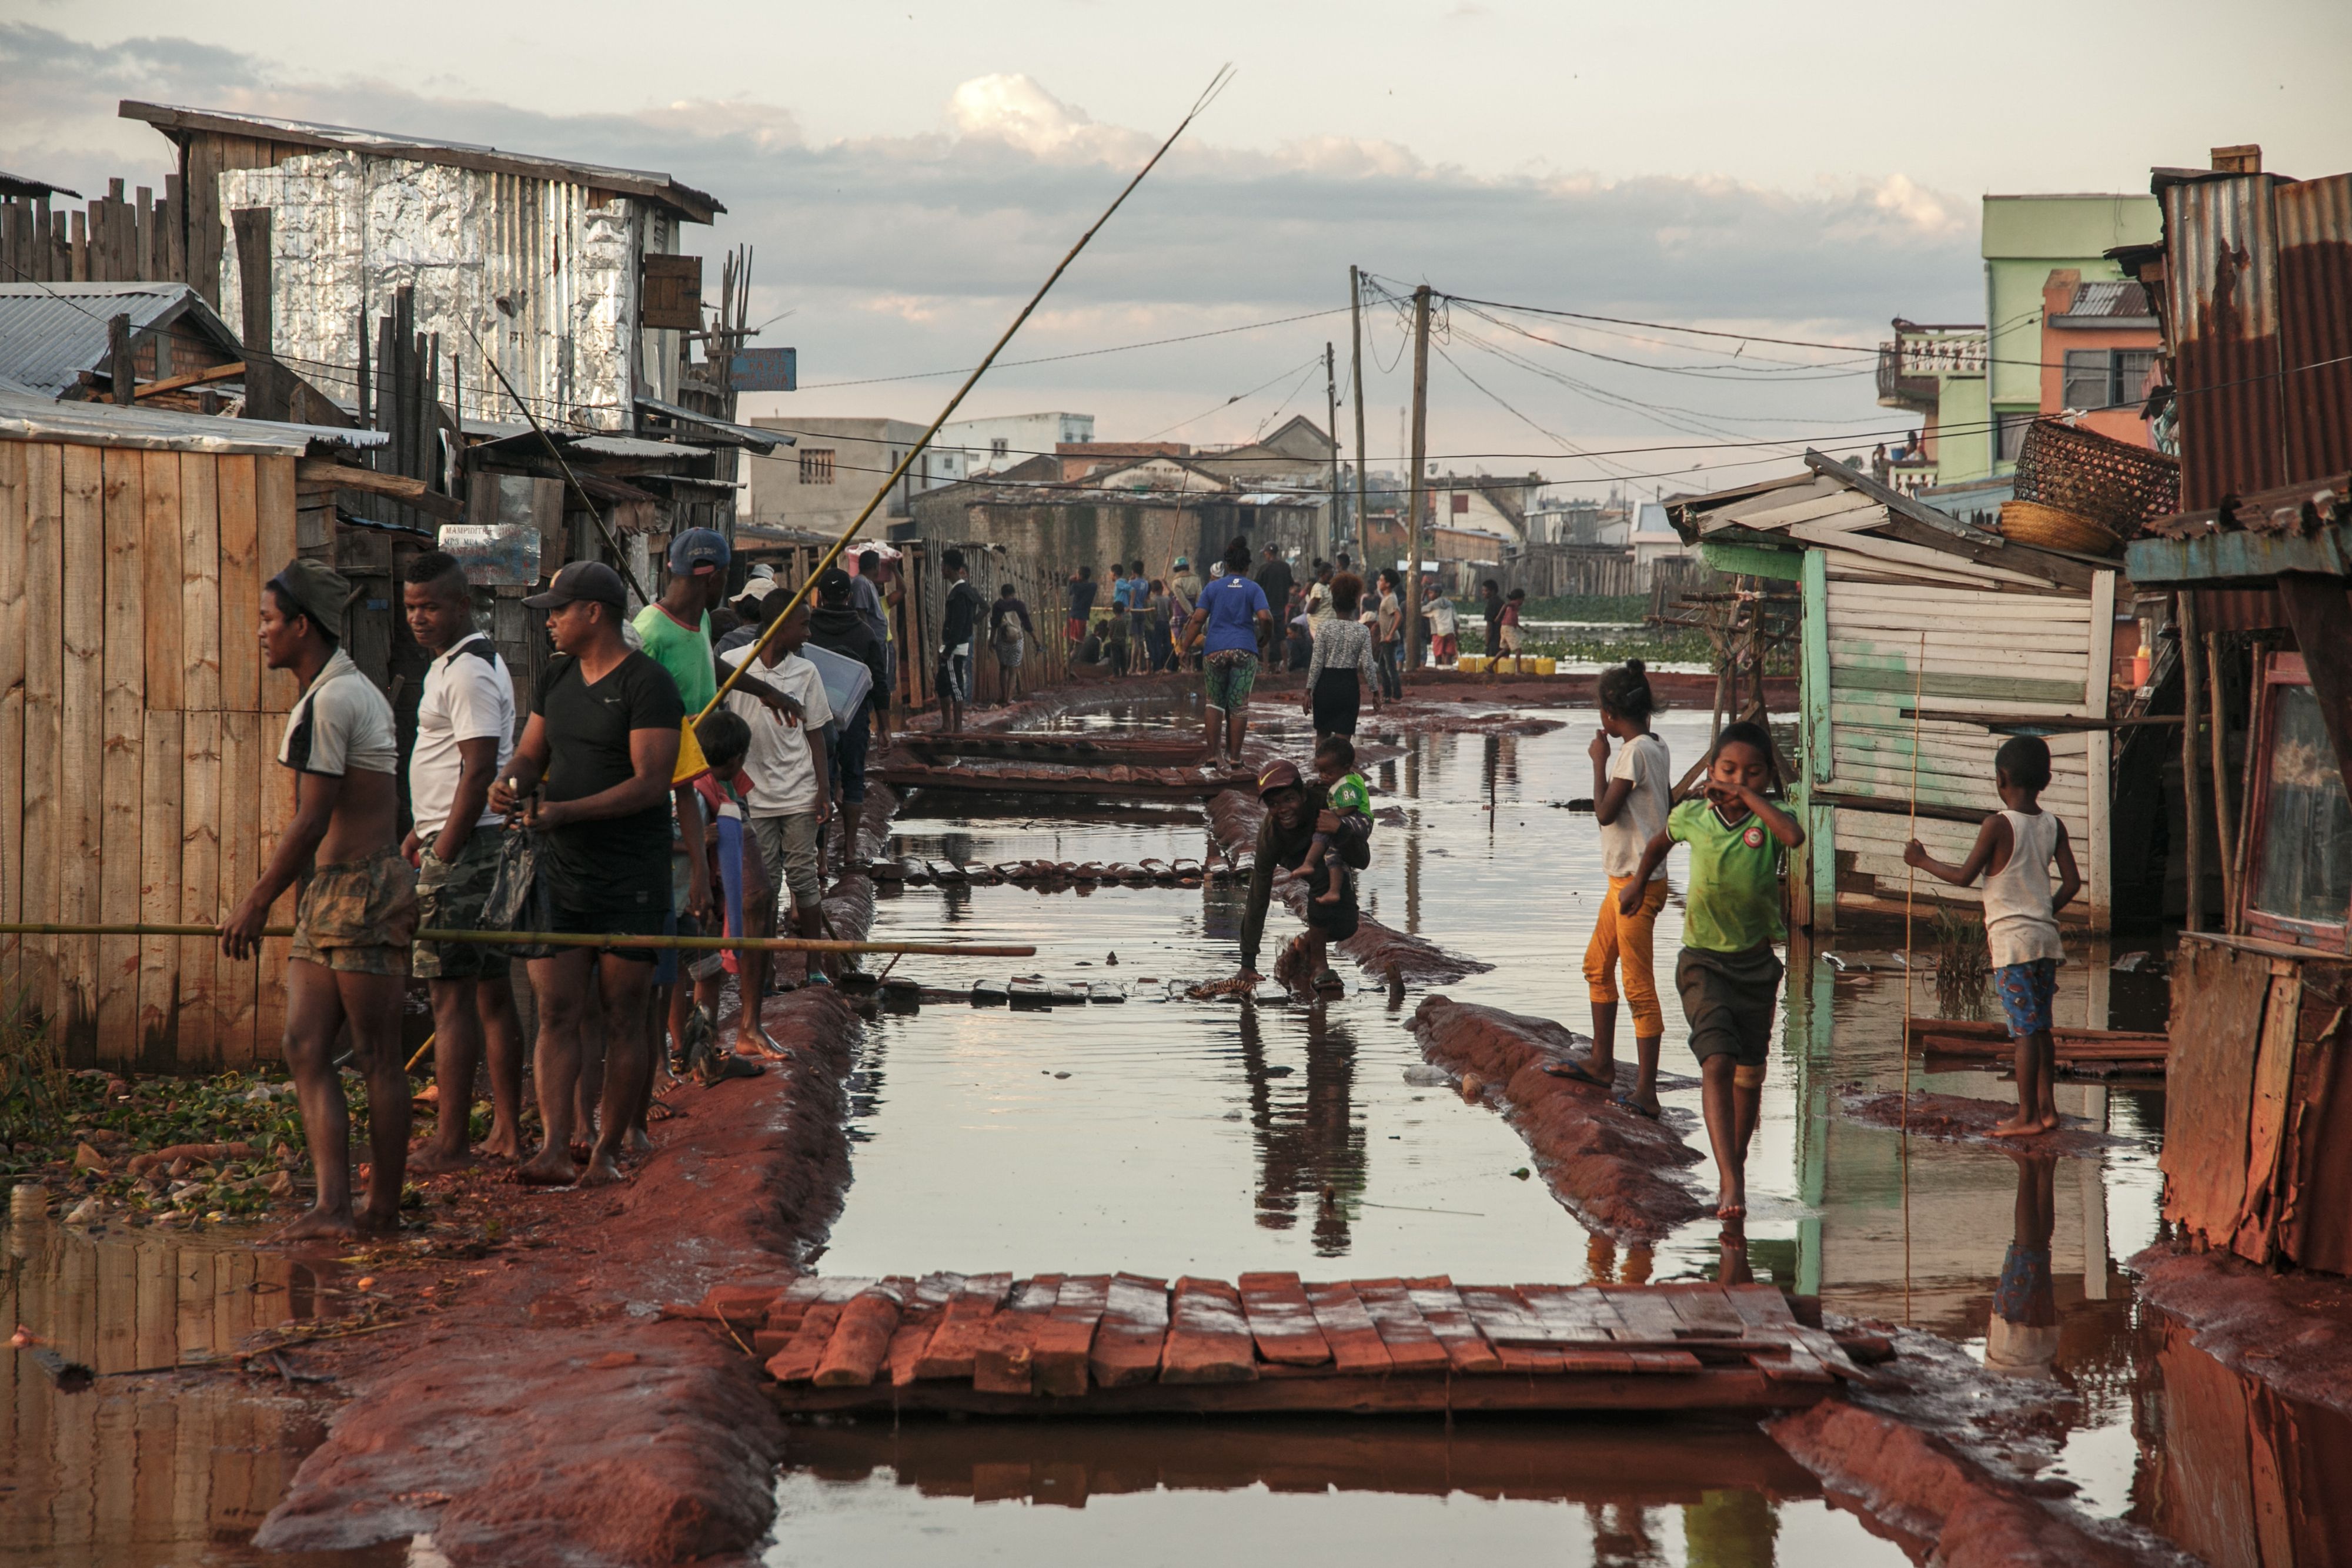 Residents of the Ankasina flooded neighbourhood stand in a flood area in Antananarivo, Madagascar in late January